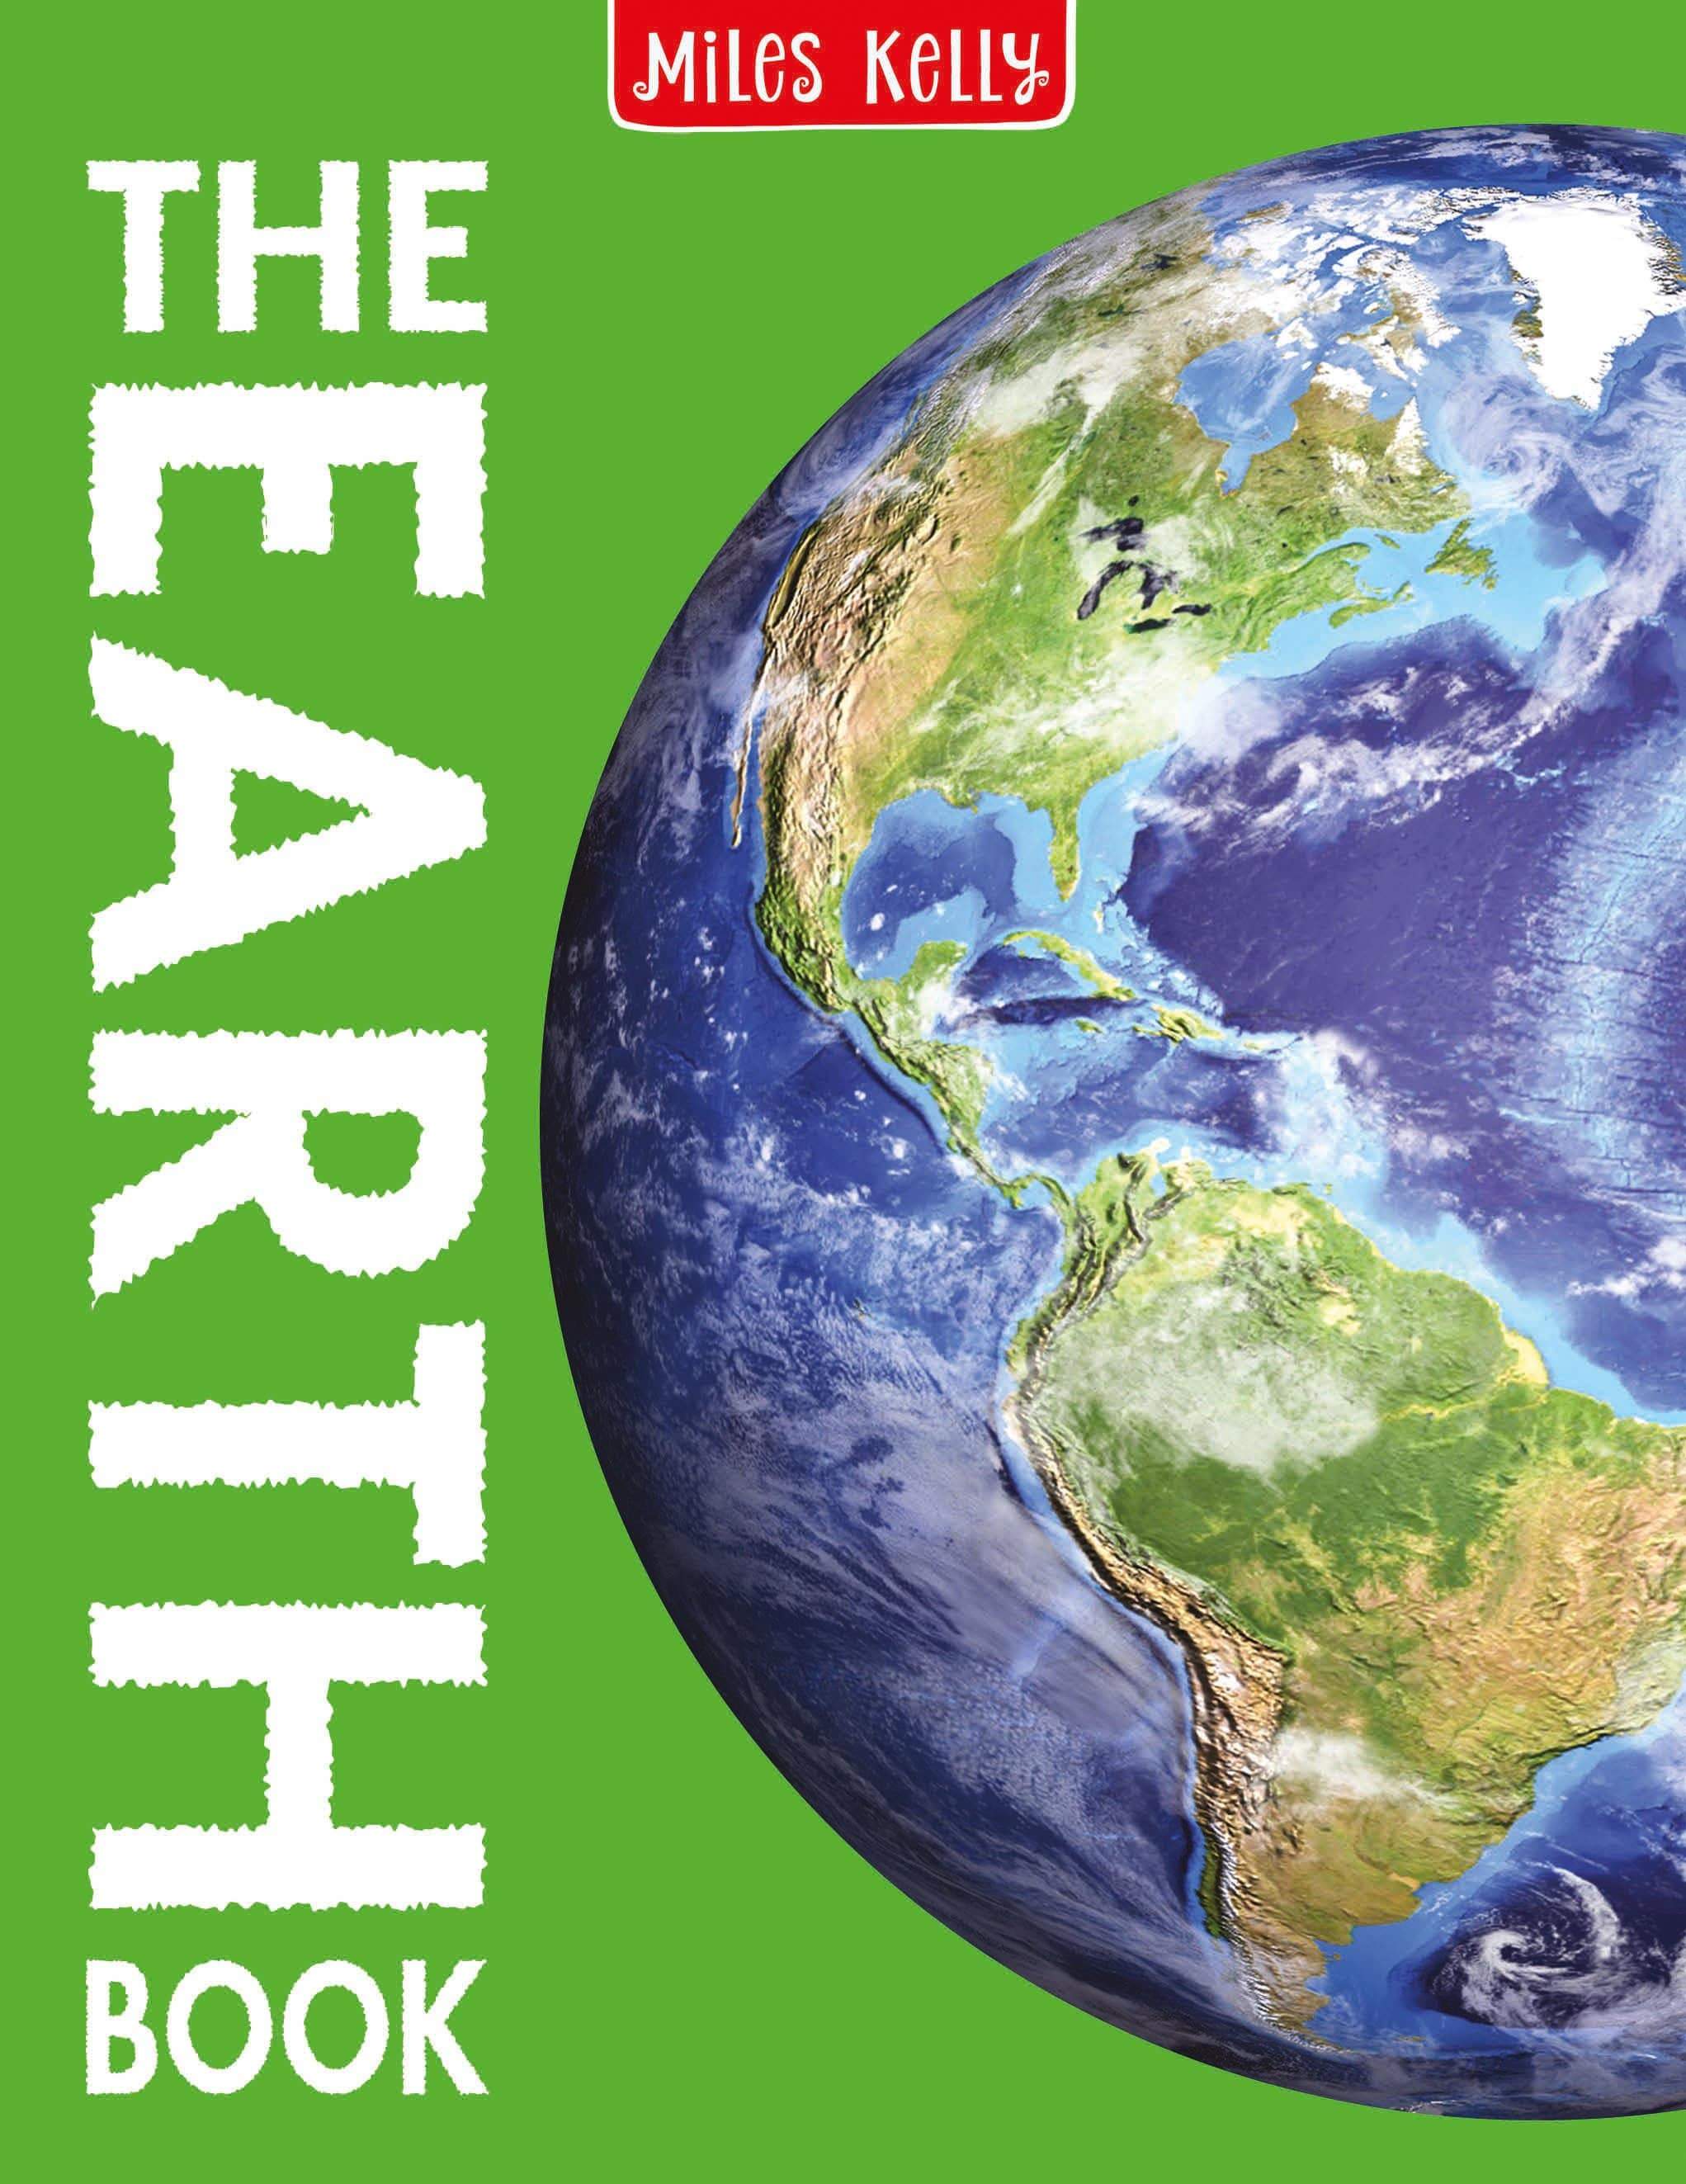 THE EARTH BOOK-MILES KELLY - Jashanmal Home